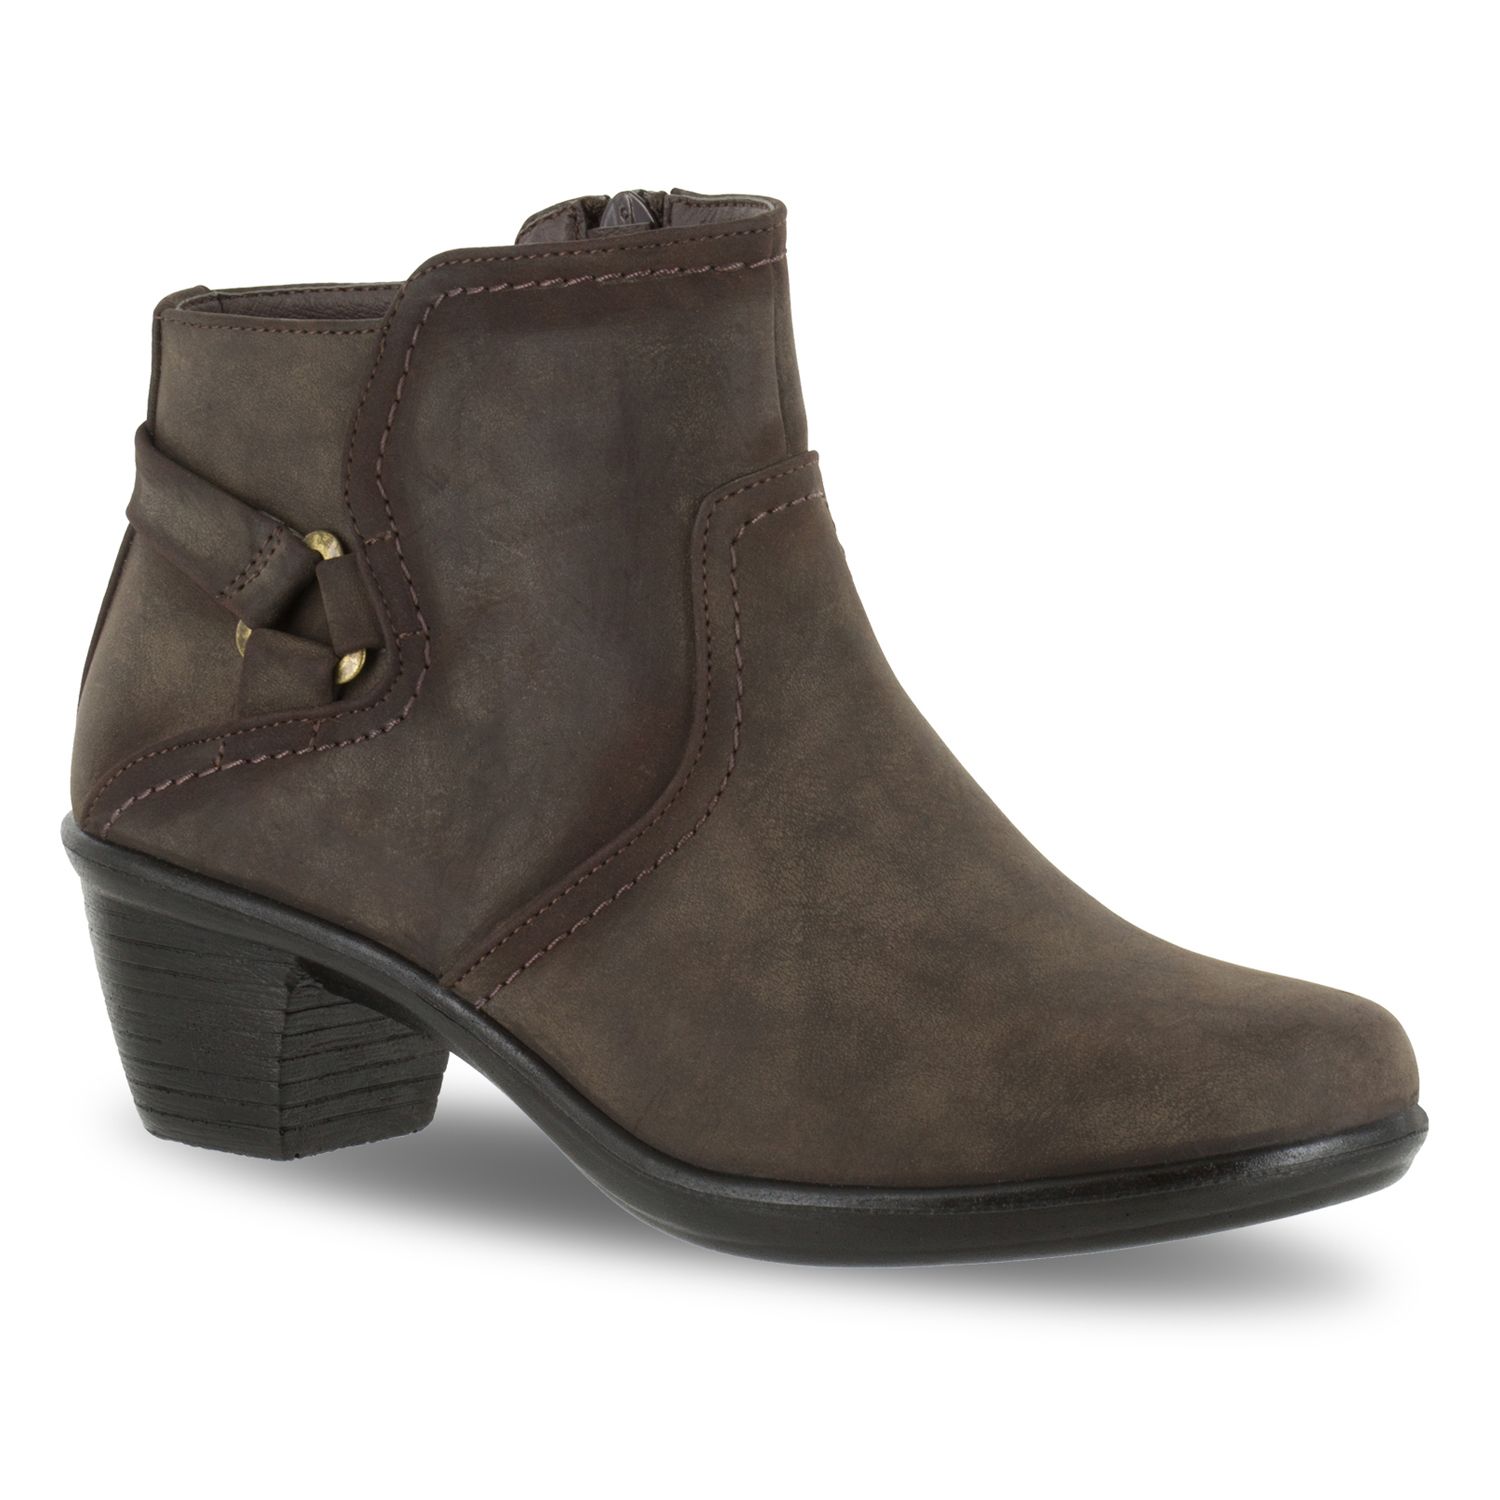 Image for Easy Street Dawnta Women's Ankle Boots at Kohl's.